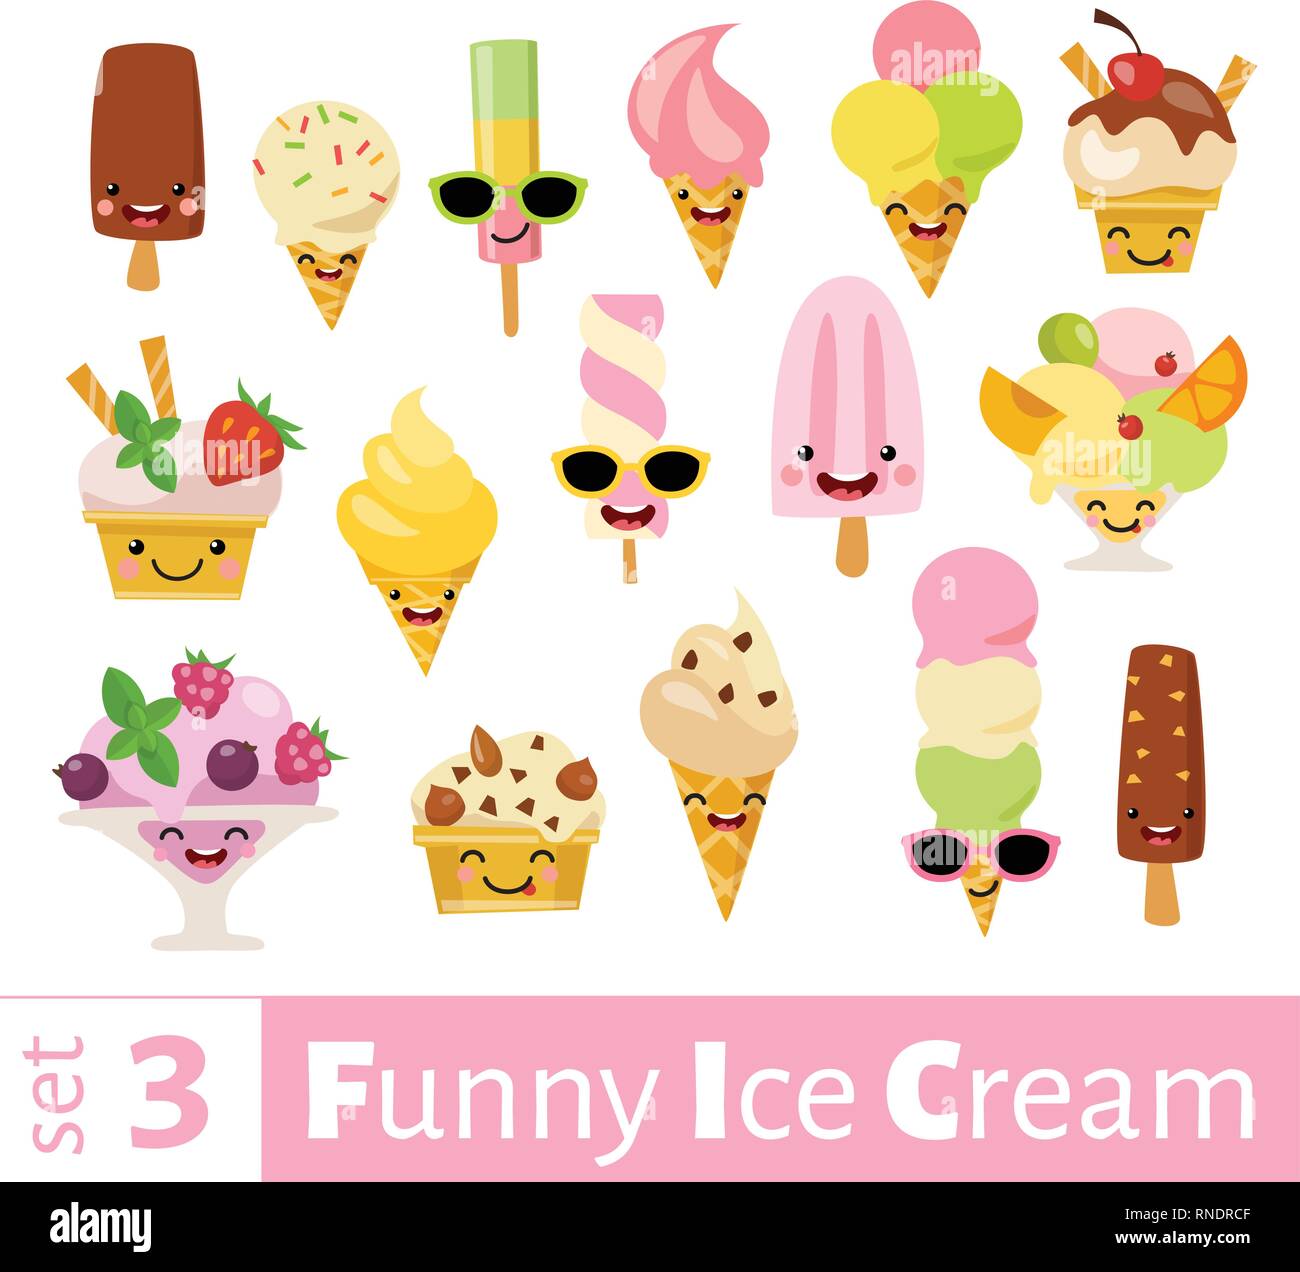 Vector set of funny food emoji icons of ice cream Stock Vector